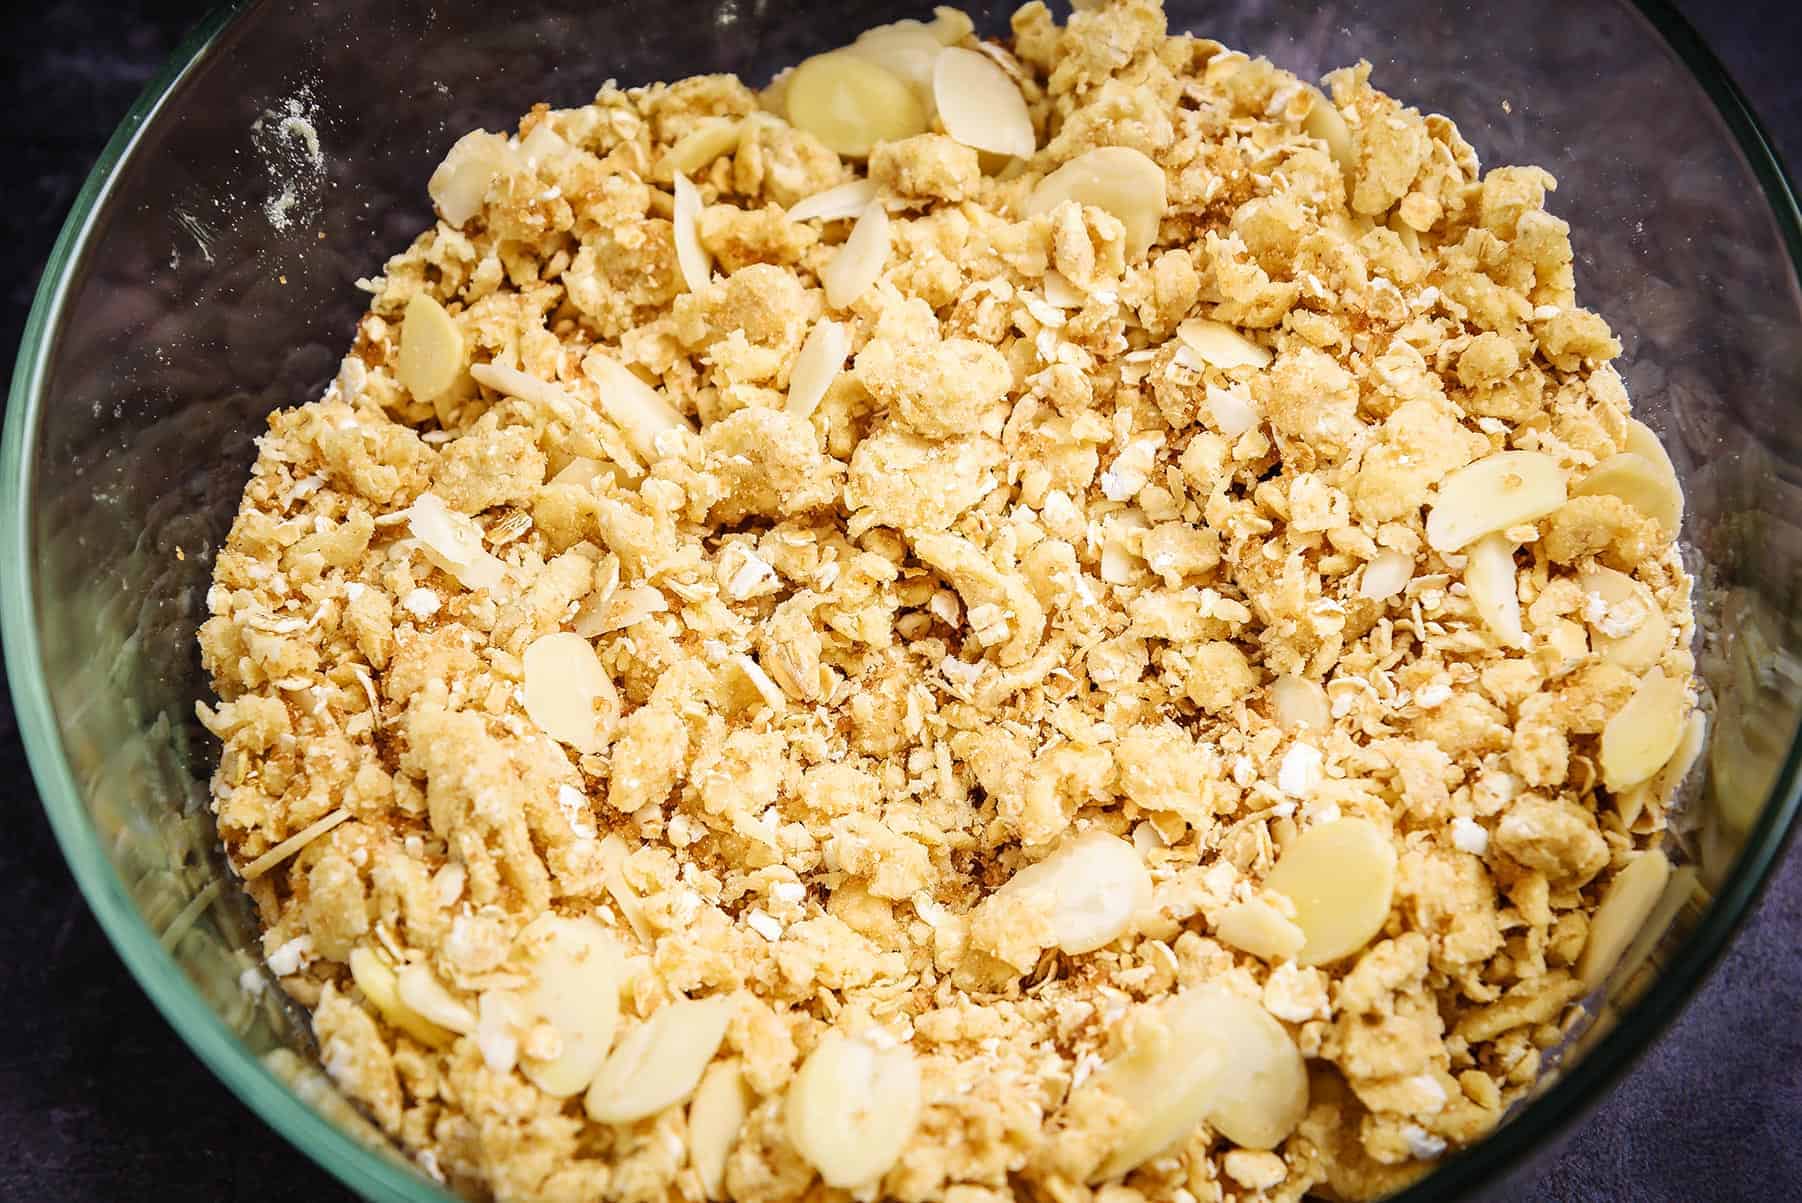 Crumble mixture in a bowl with almonds and sugar mixed in